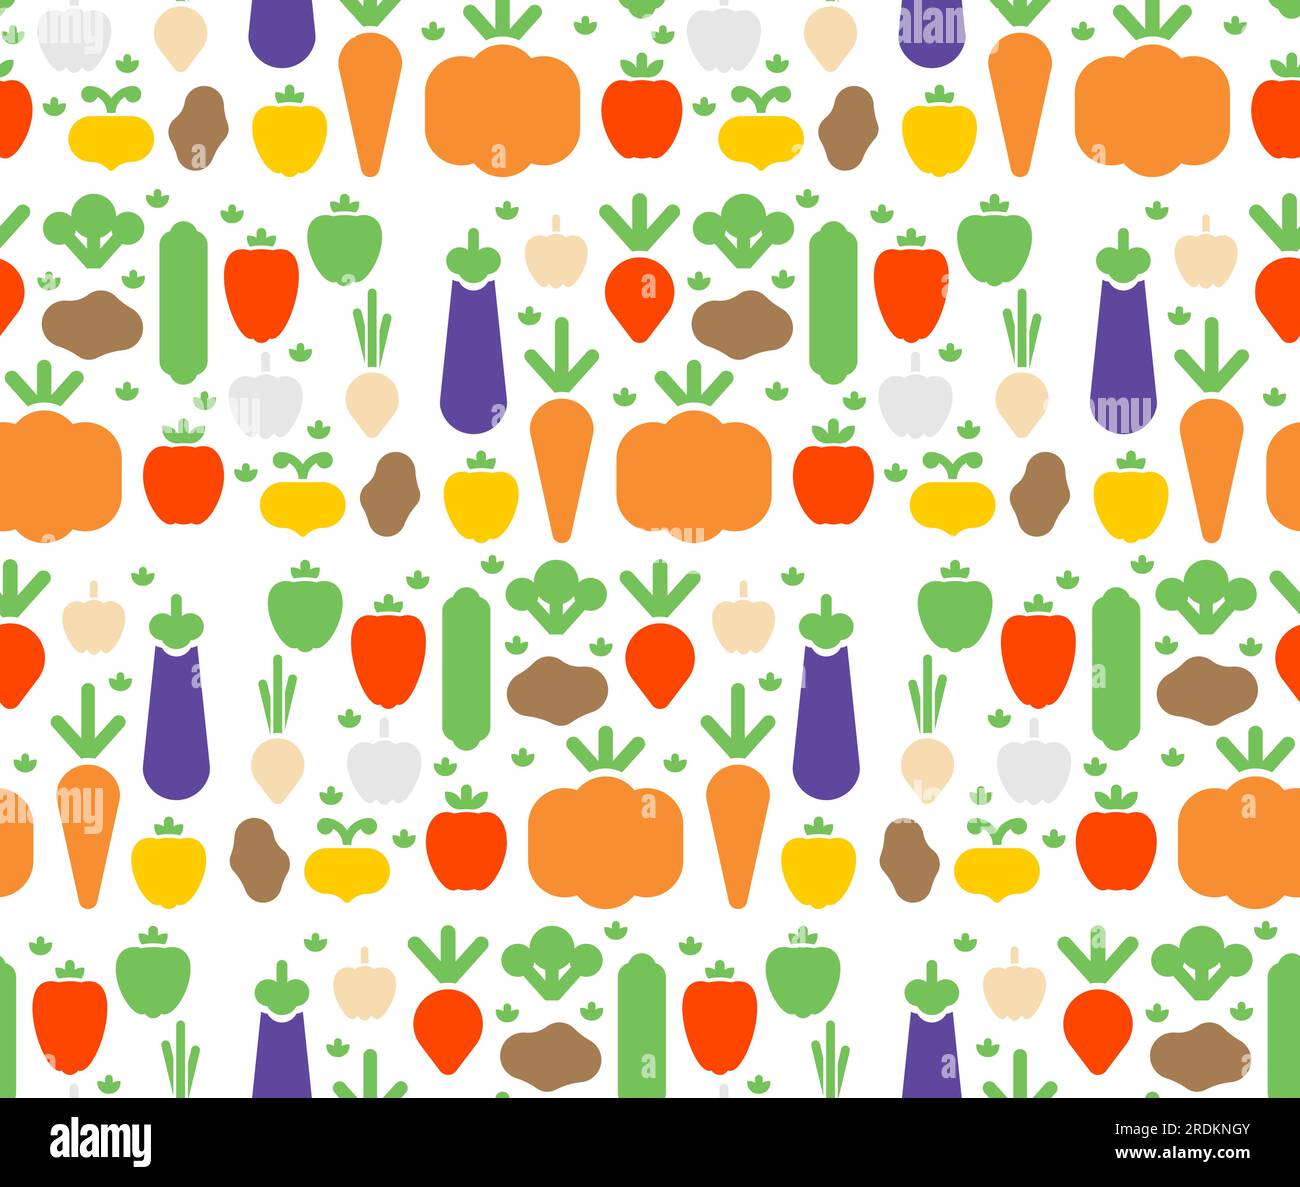 Vegetables pattern seamless. Vegetable set background. Eggplant and potatoes. Pumpkin and turnip. Radish and tomato. Garlic and carrot signs Stock Vector